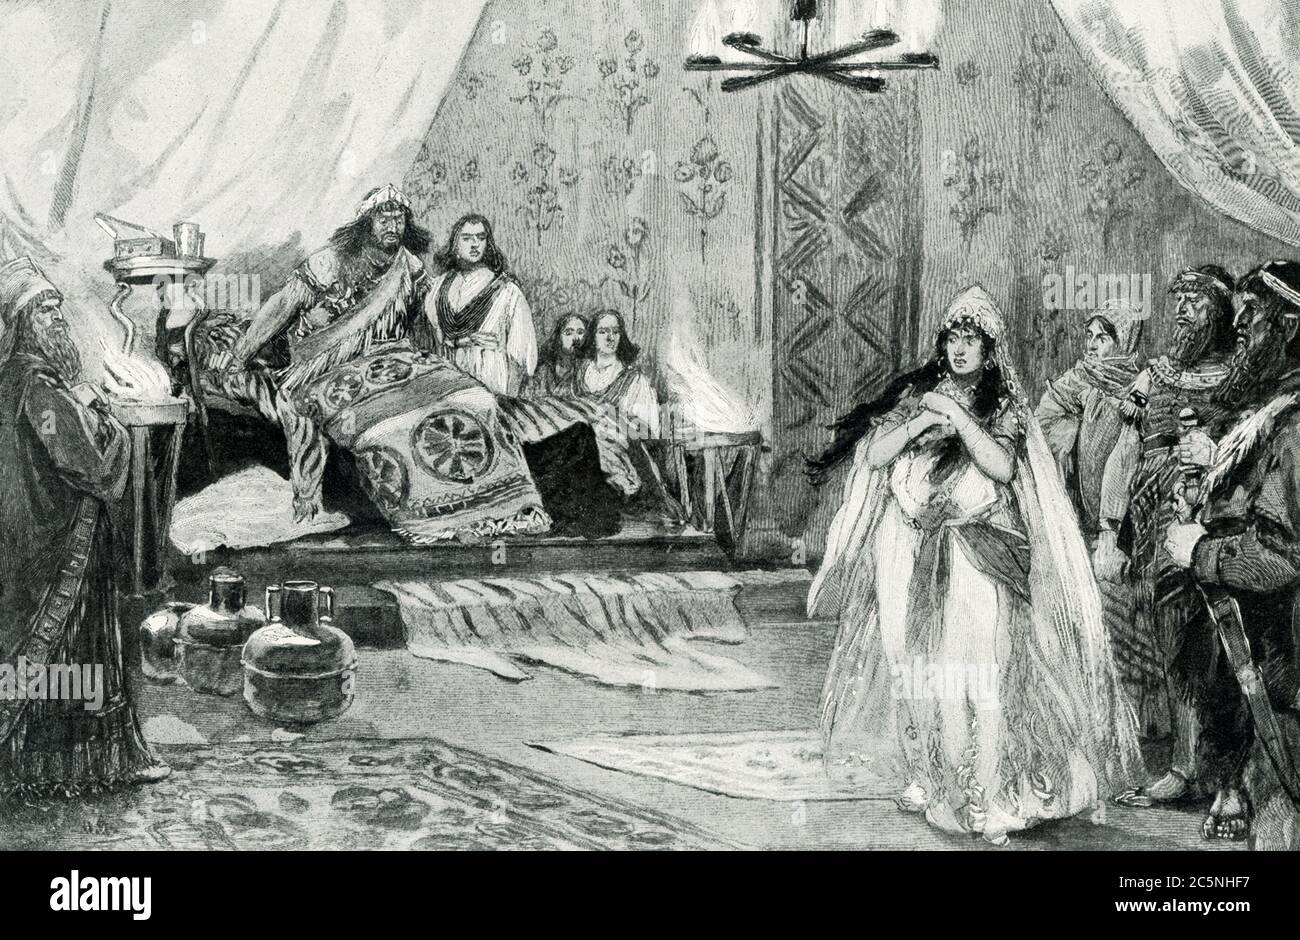 This illusttration dates to the early 1900s and shows Judith before Holofernes. The story behind Judith and Holofernes comes from the Bible - the deuterocanonical book of Judith. The Bible tells us that the King of Nineveh, Nebuchadnezzar, sent his general, Holofernes, to subdue his enemies, the Jews. Judith, whose name means 'lady Jew' or 'Jewish woman', was a strikingly beautiful widow. She overhears plans for surrender and decides to 'deliver the city'. She creeps into the Assyrian camp, seduces Holofernes with her captivating beauty (as seen here), waits until he is thoroughly drunk, and c Stock Photo